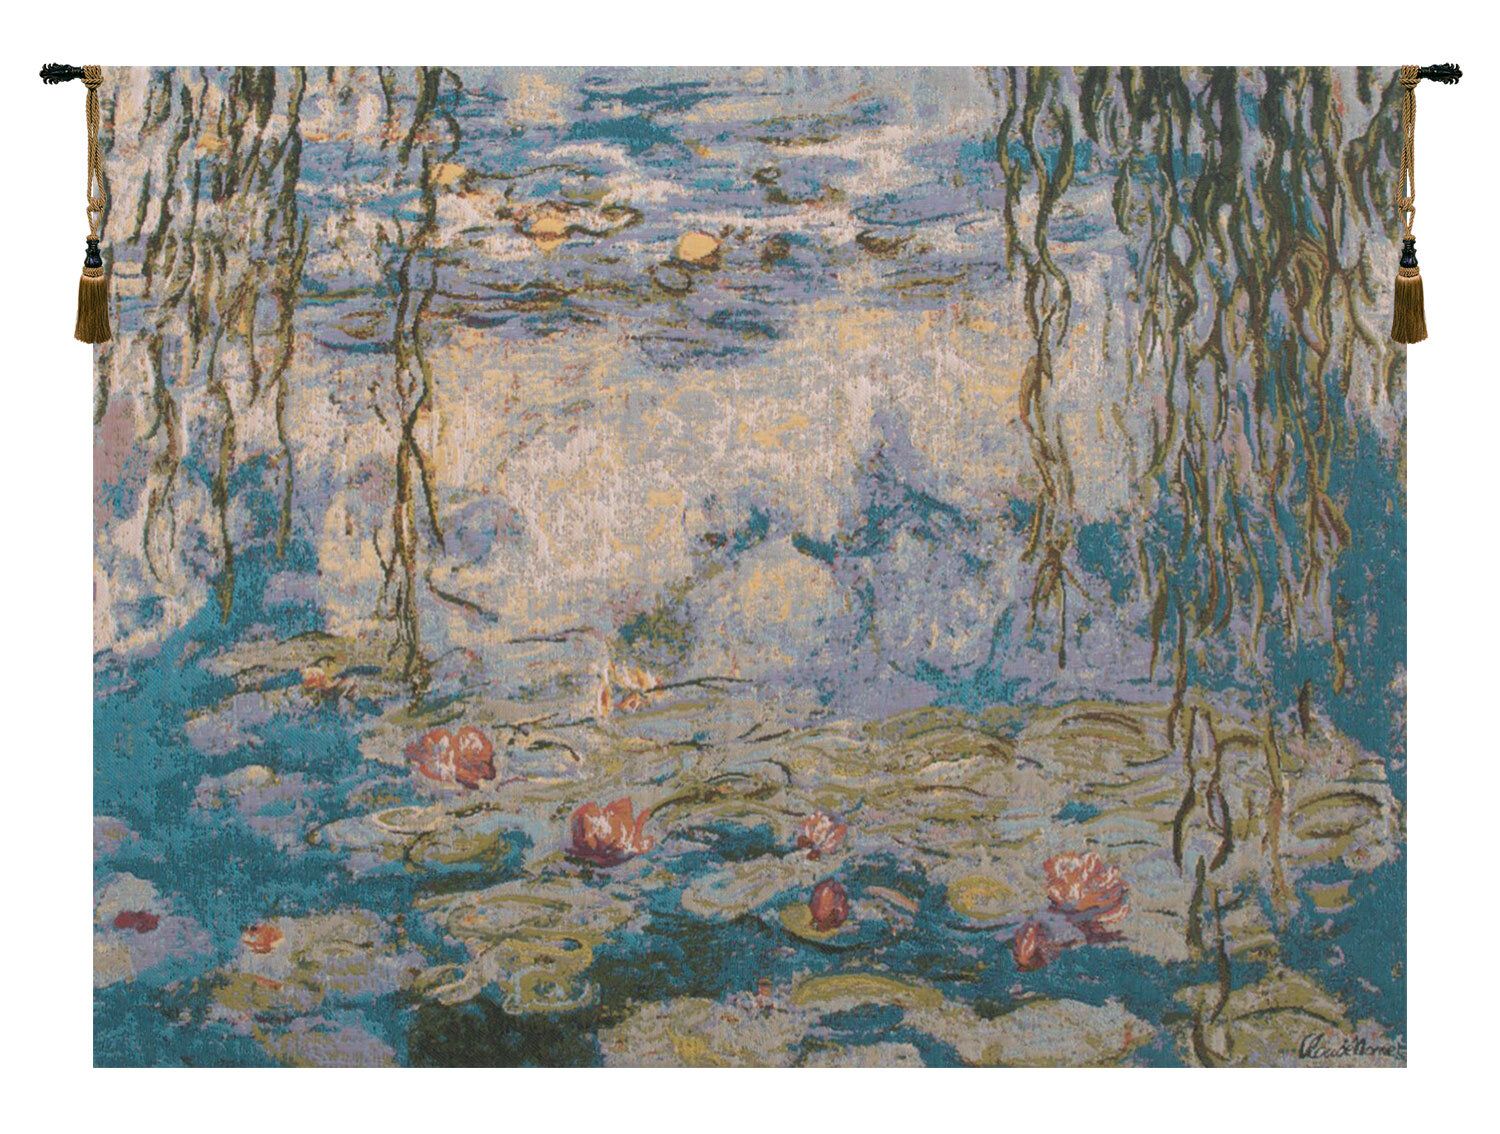 40 X 60 Art Tapestries You'll Love In 2021 | Wayfair With Regard To Best And Newest Blended Fabric Vieux Brussels Wall Hangings (View 7 of 20)